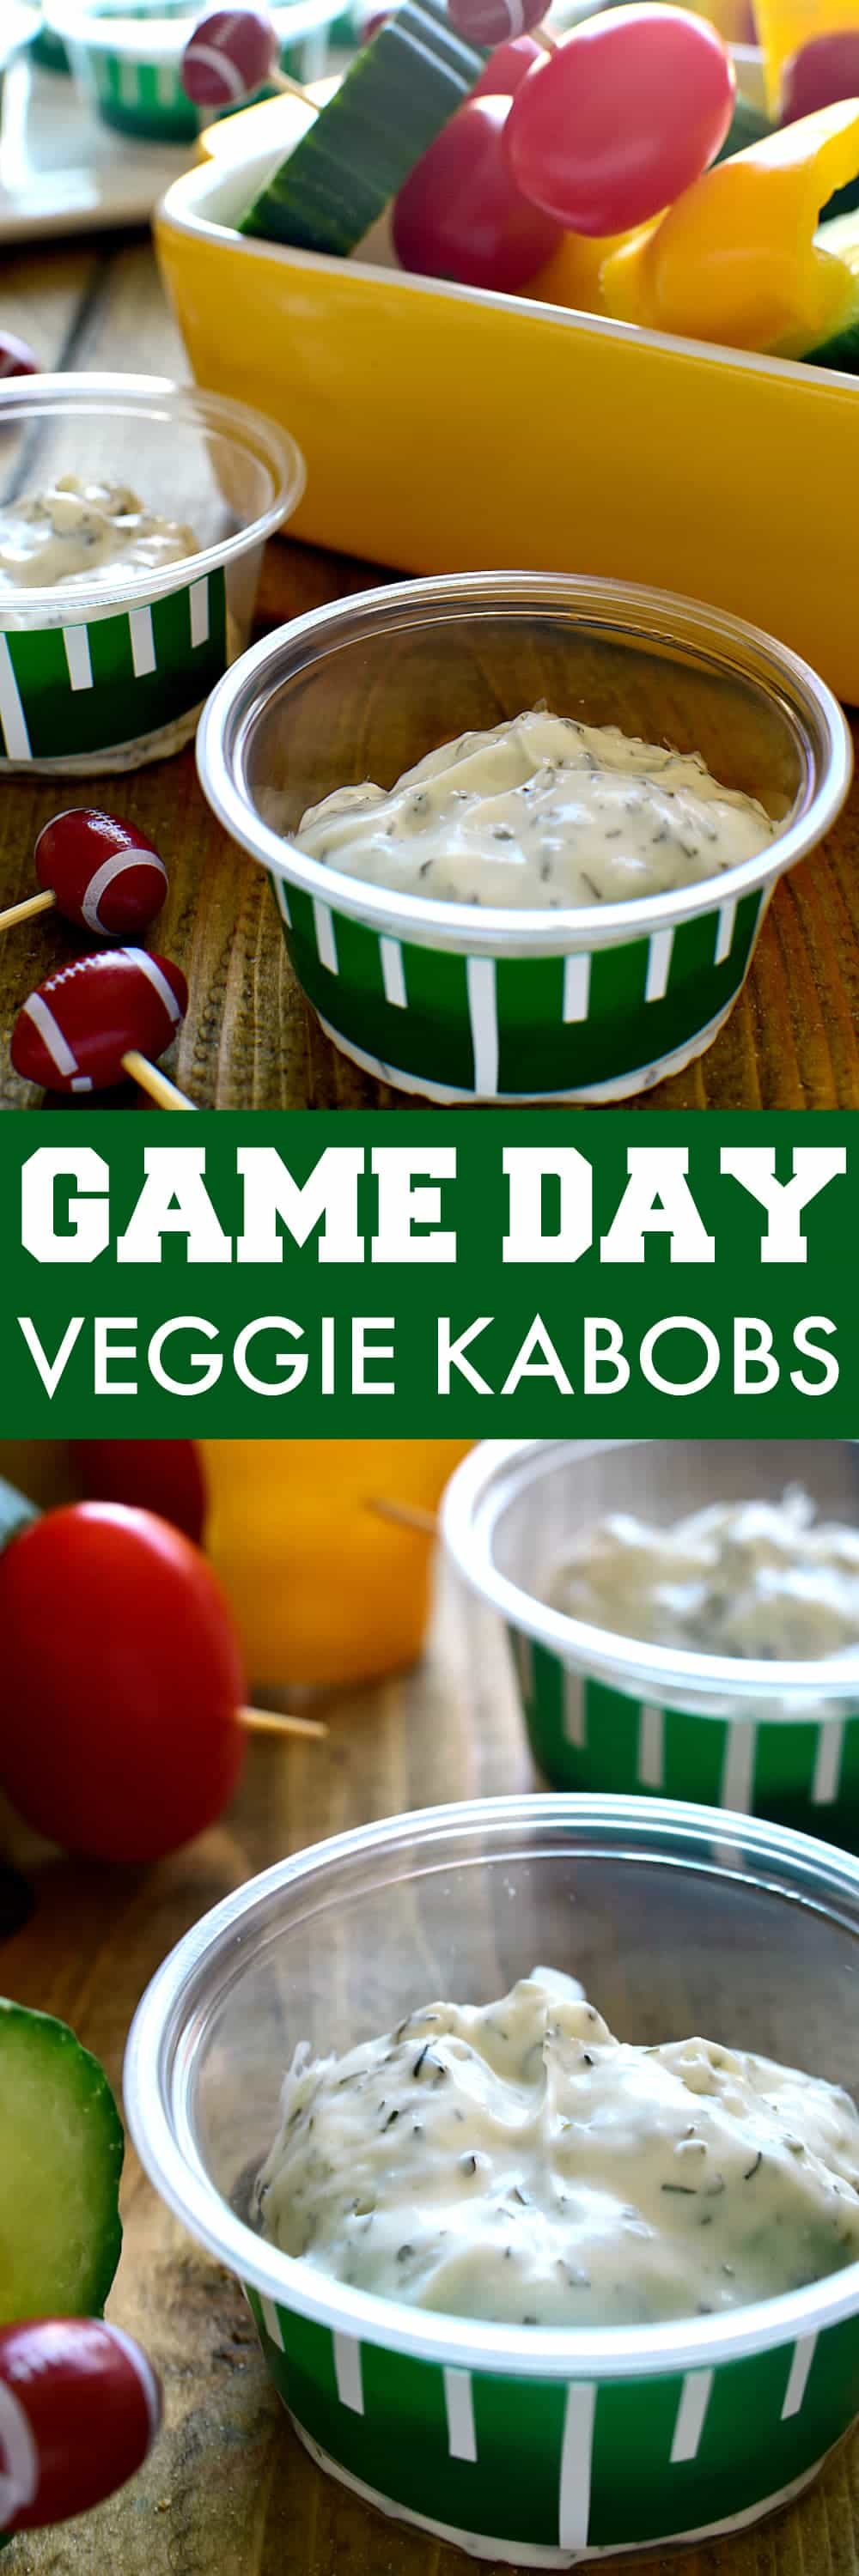 Game Day Veggie Kabobs are so easy to make and perfect for the big game! Quick and simple, this is guaranteed to have everyone eating their veggies!